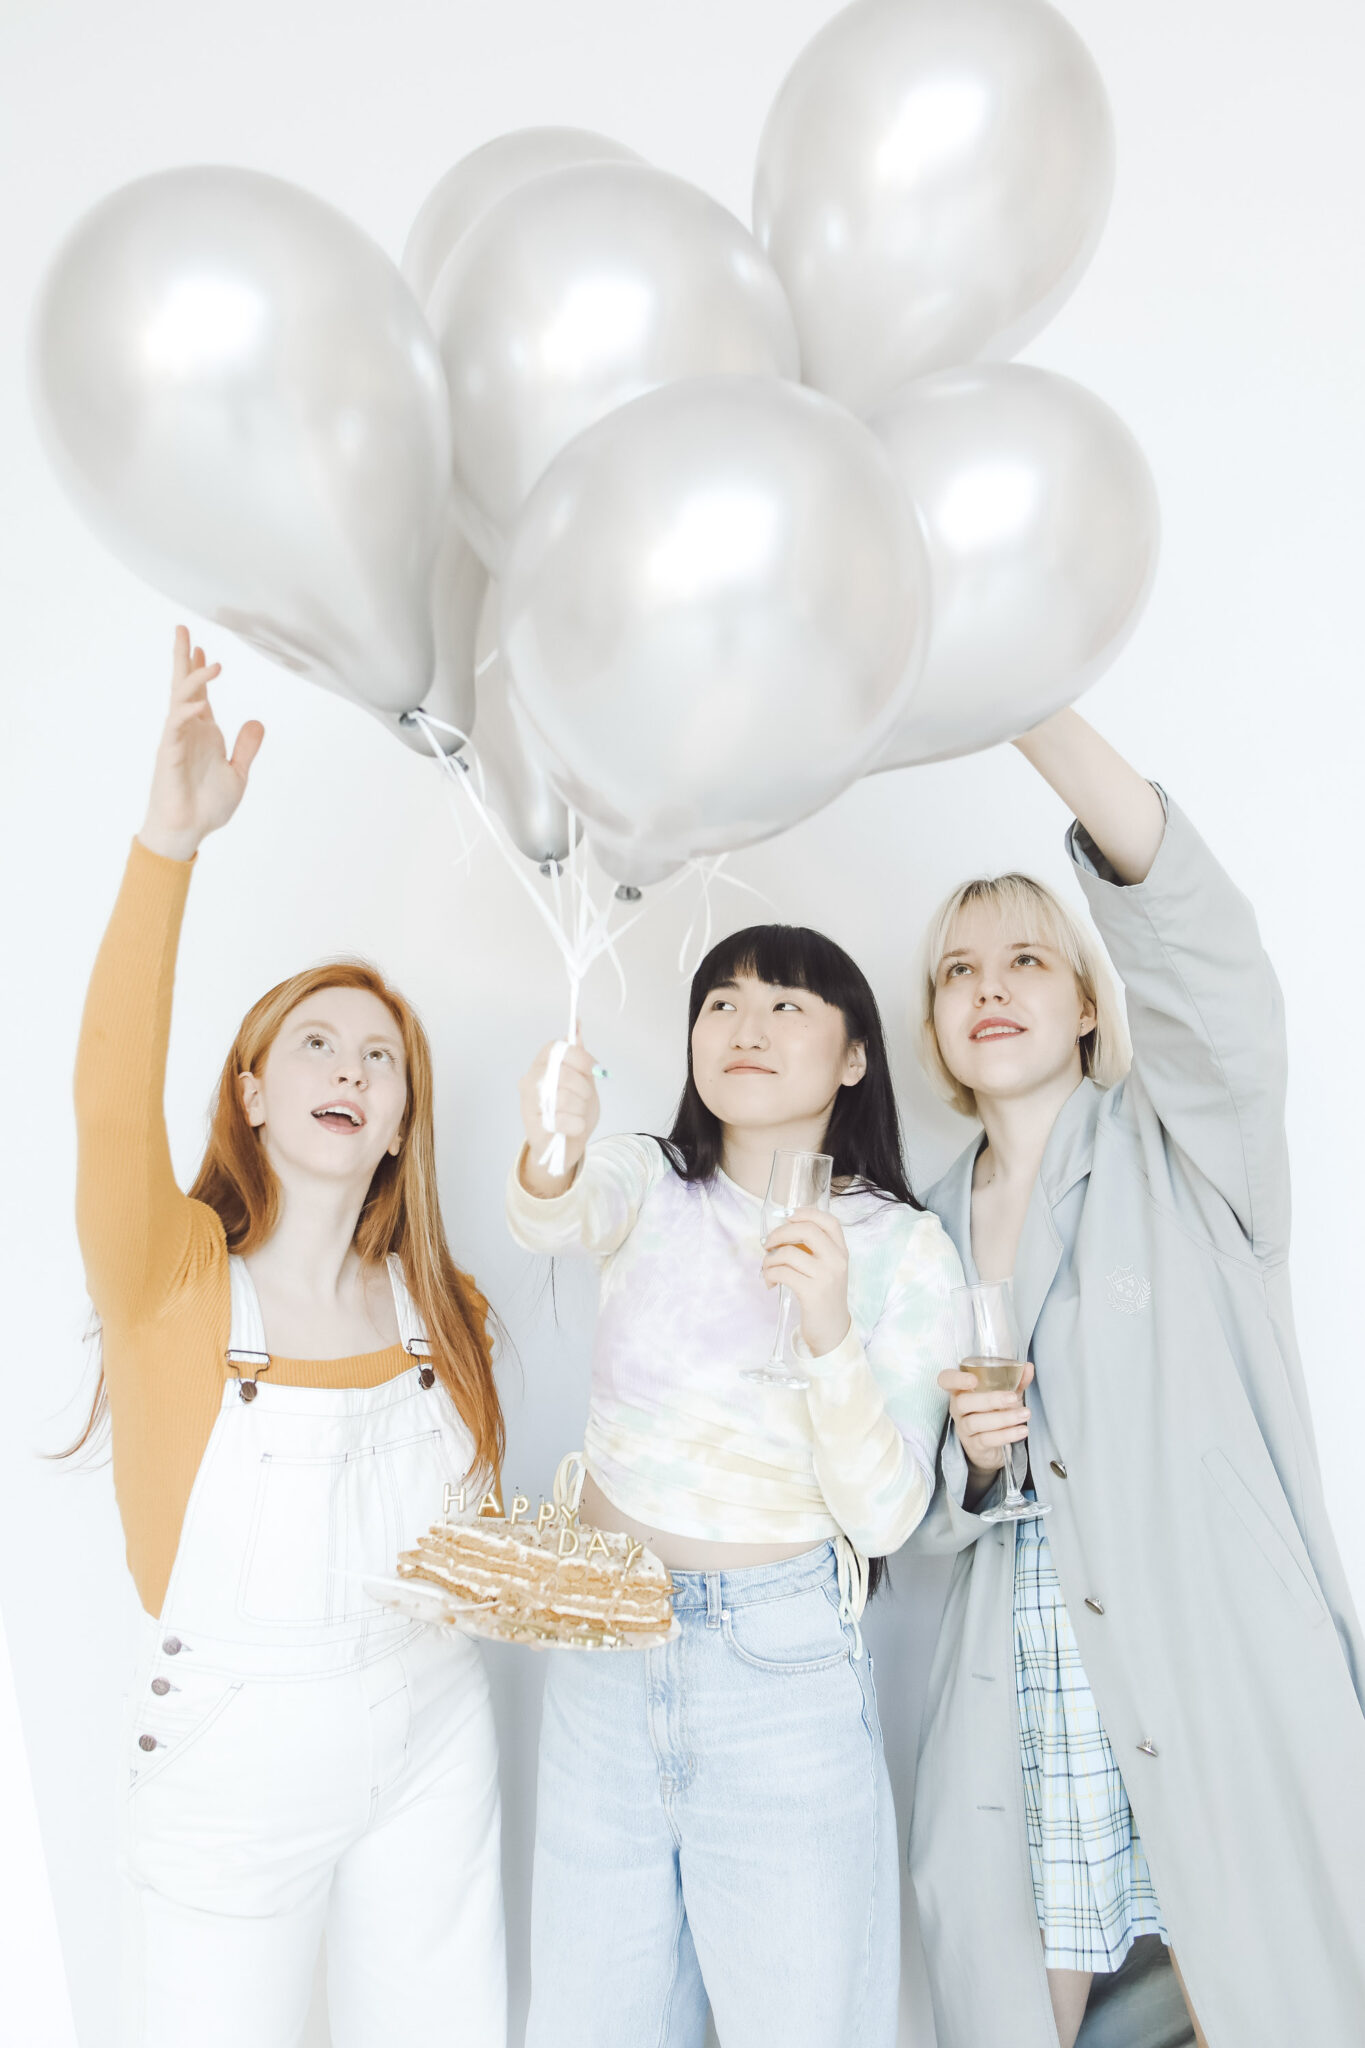 3 women hold silver balloons and look up. The middle woman holds her Birthday cake in surprise. This article covers how to give your best friend the best surprise Birthday party ever.